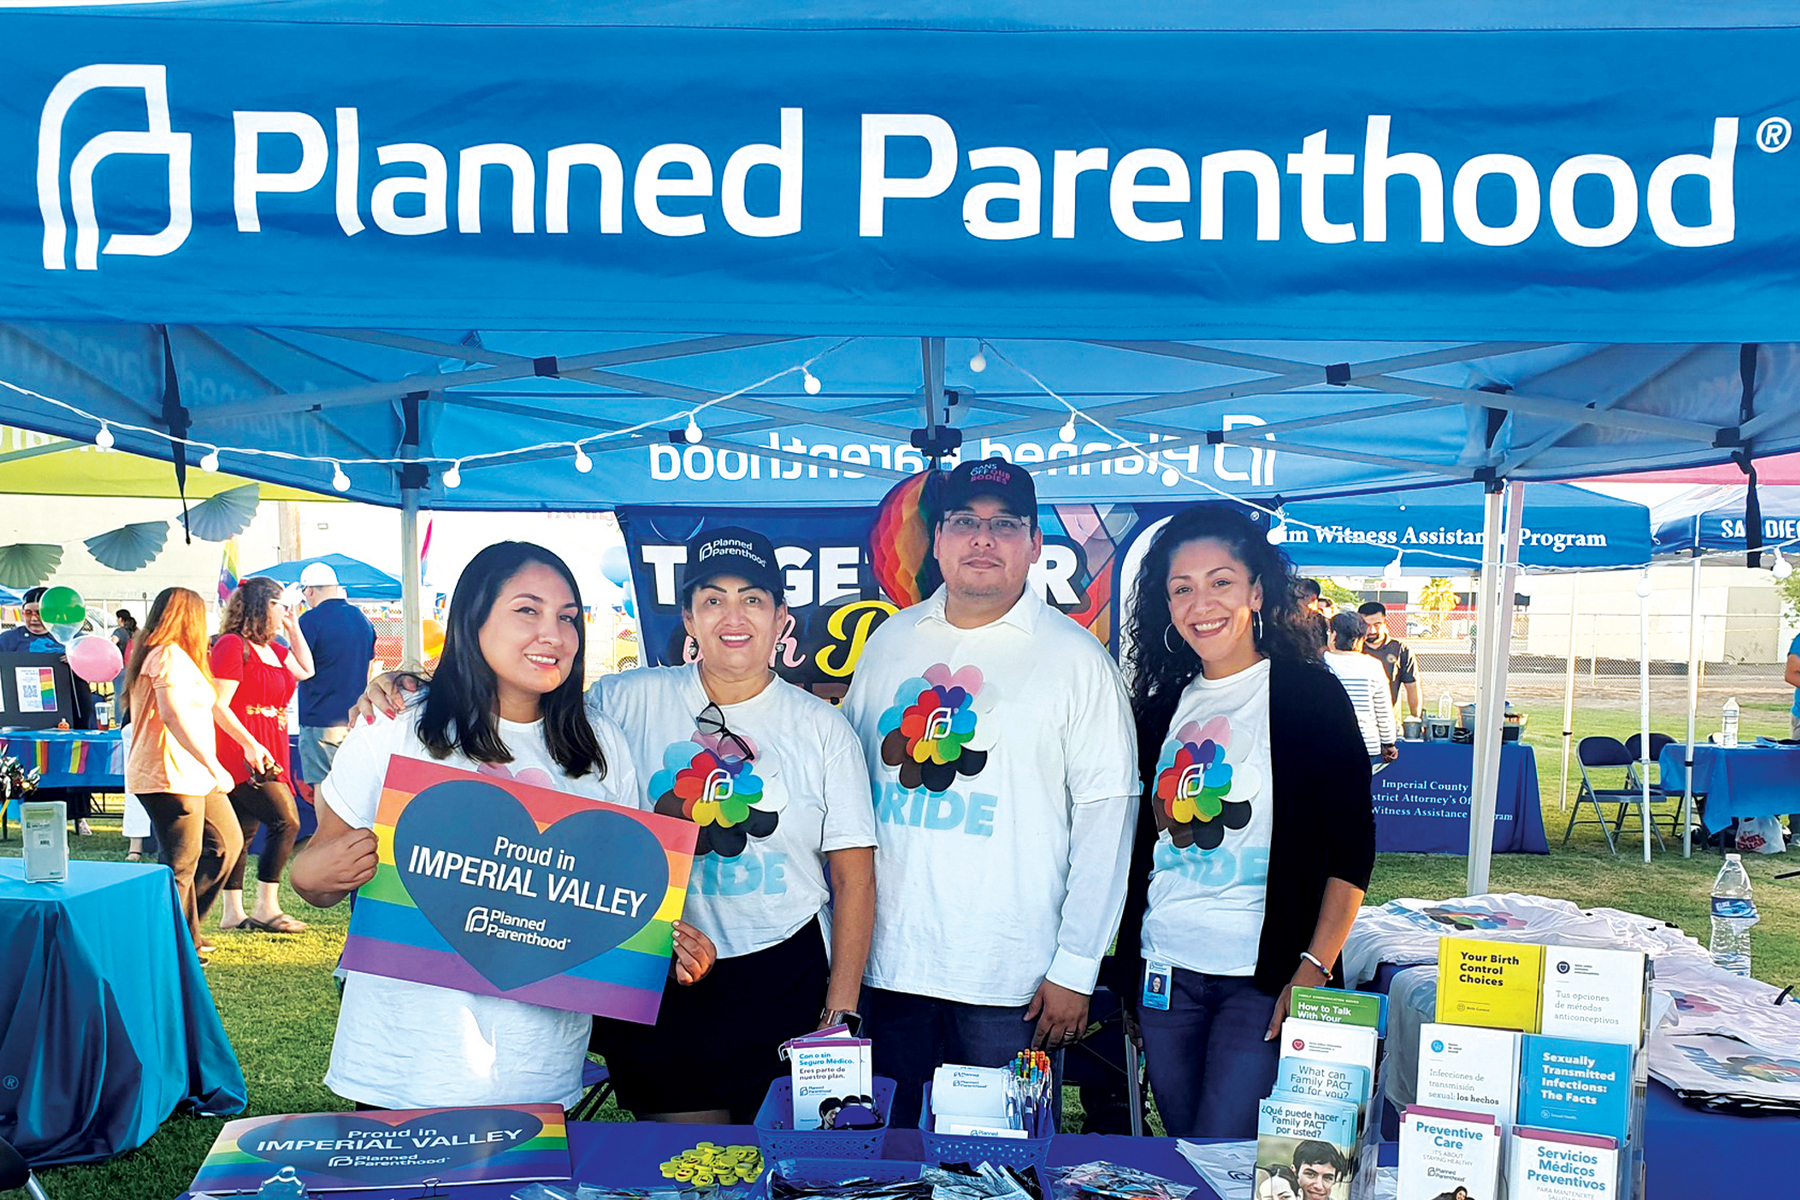 PPPSW booth at Imperial Valley Pride